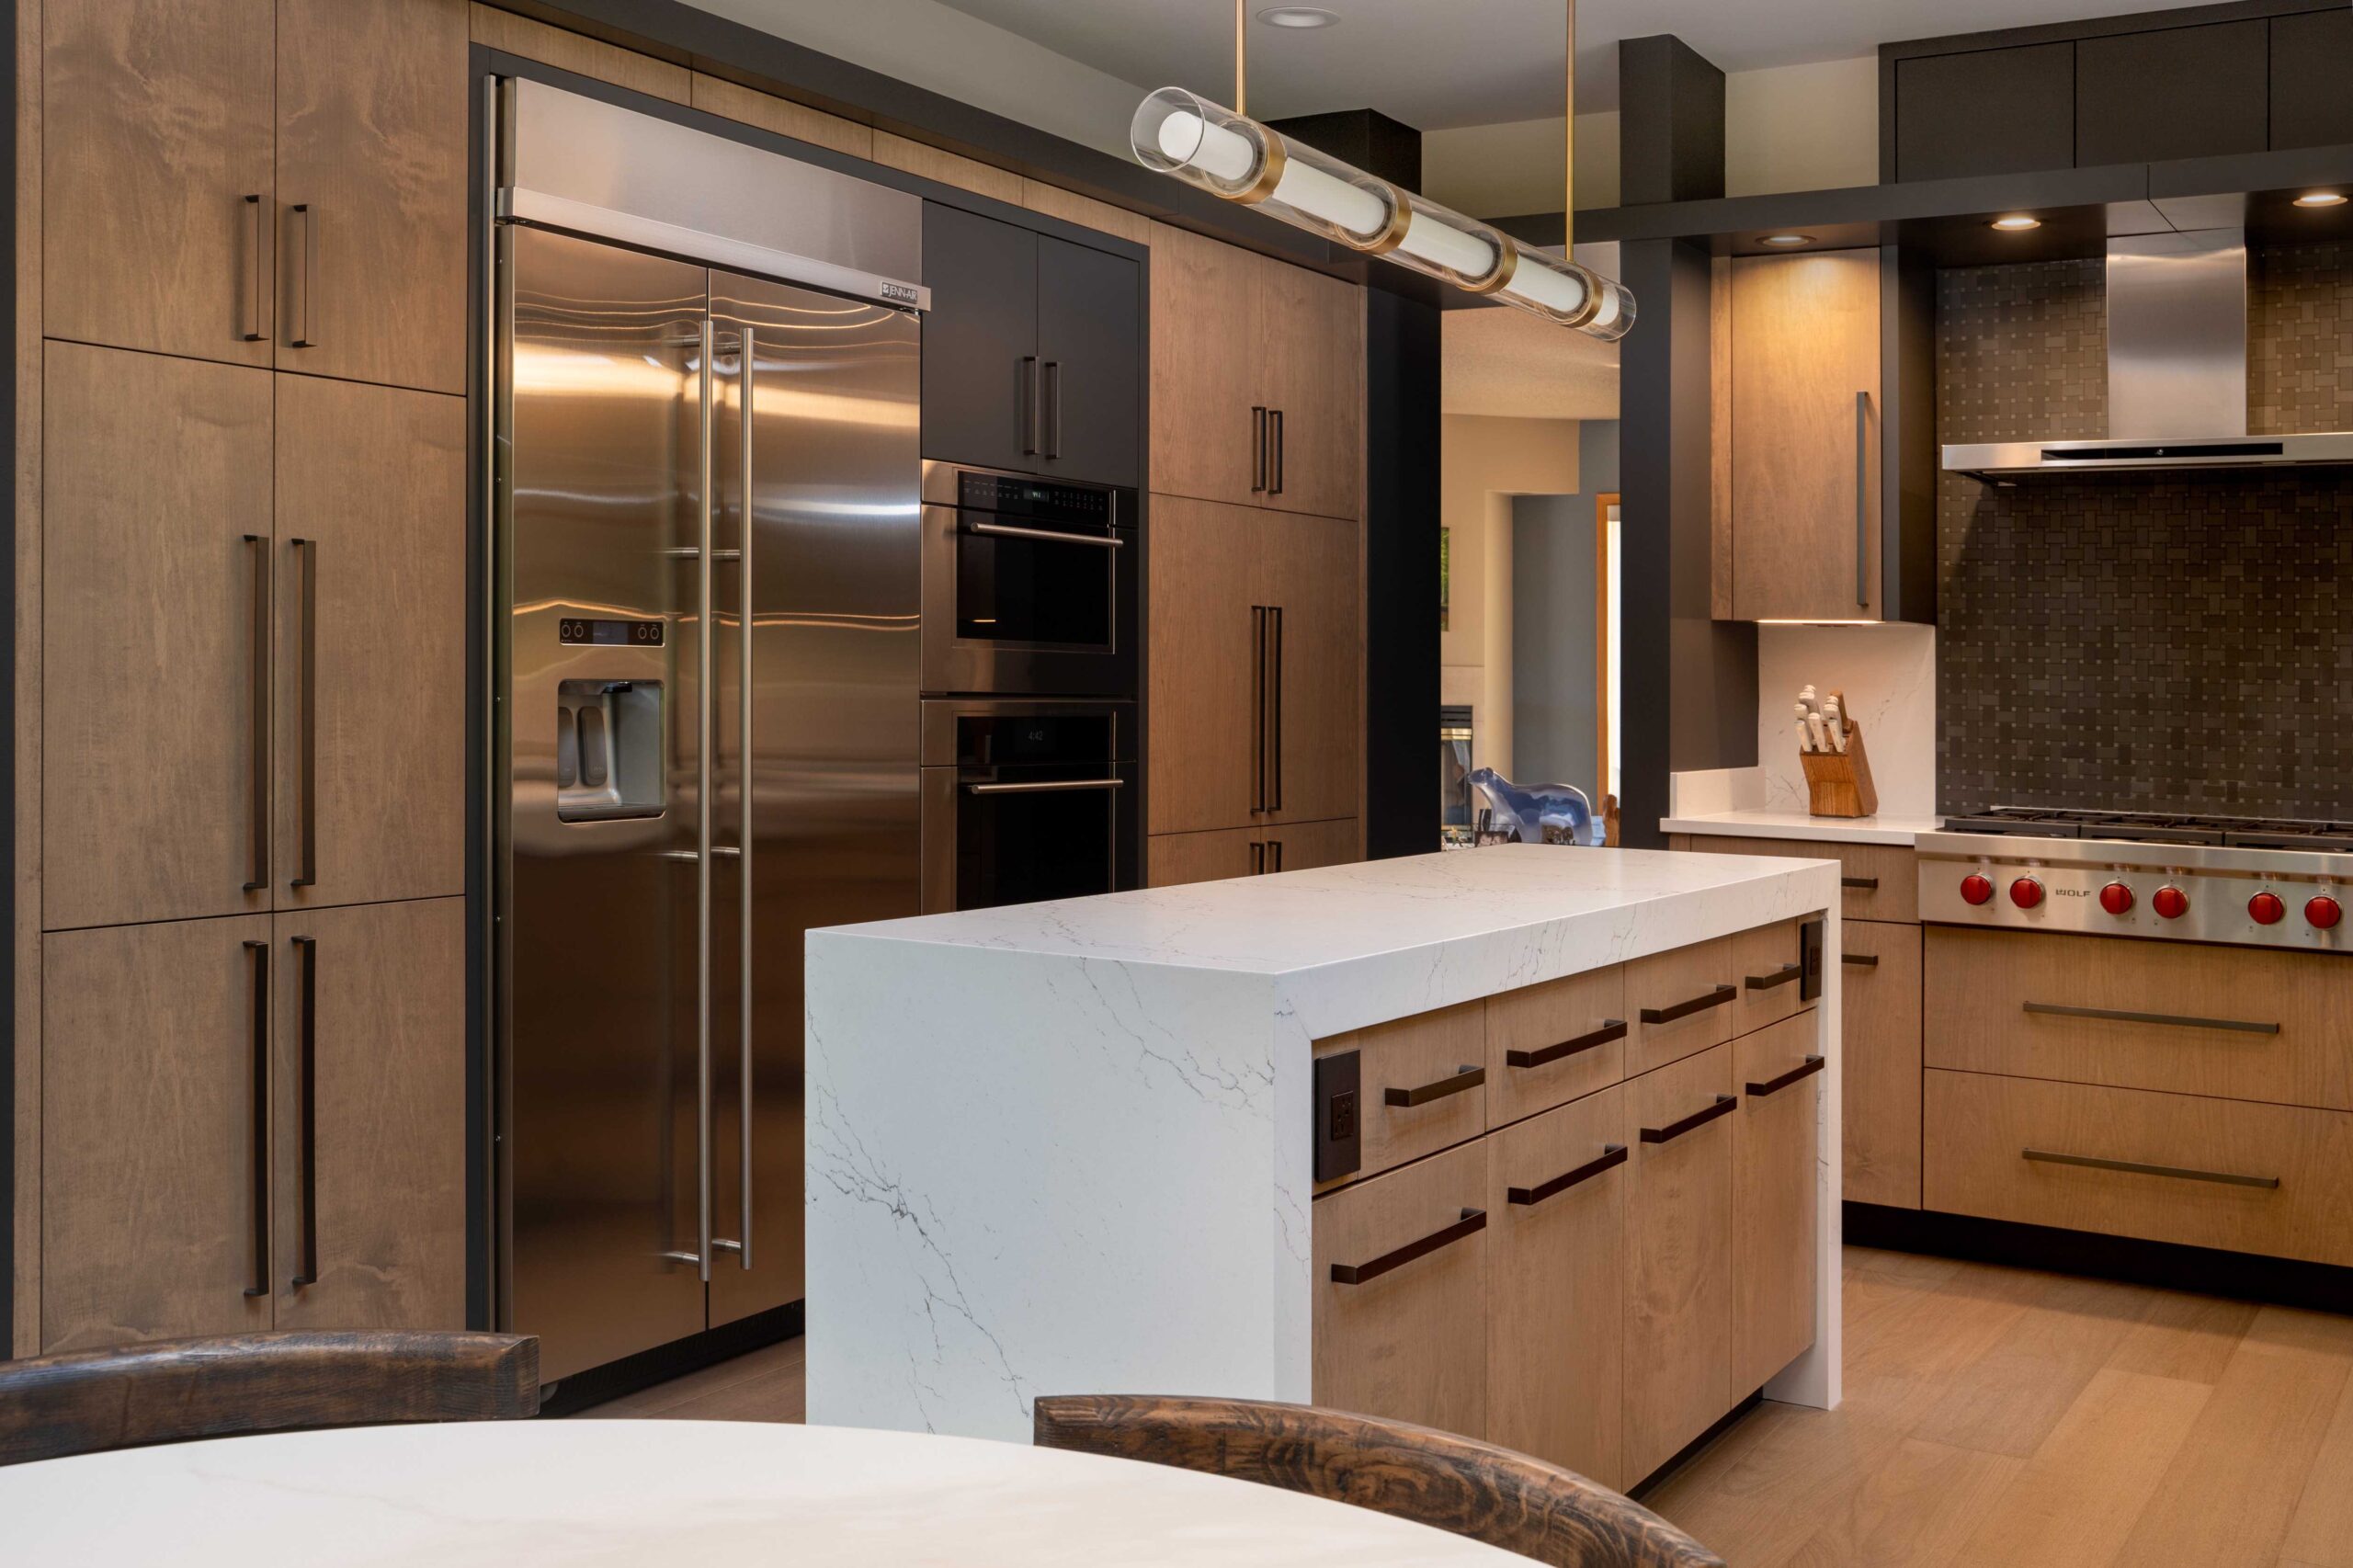 A modern kitchen with wooden cabinets and stainless steel appliances, perfect for a Bloomington remodel.